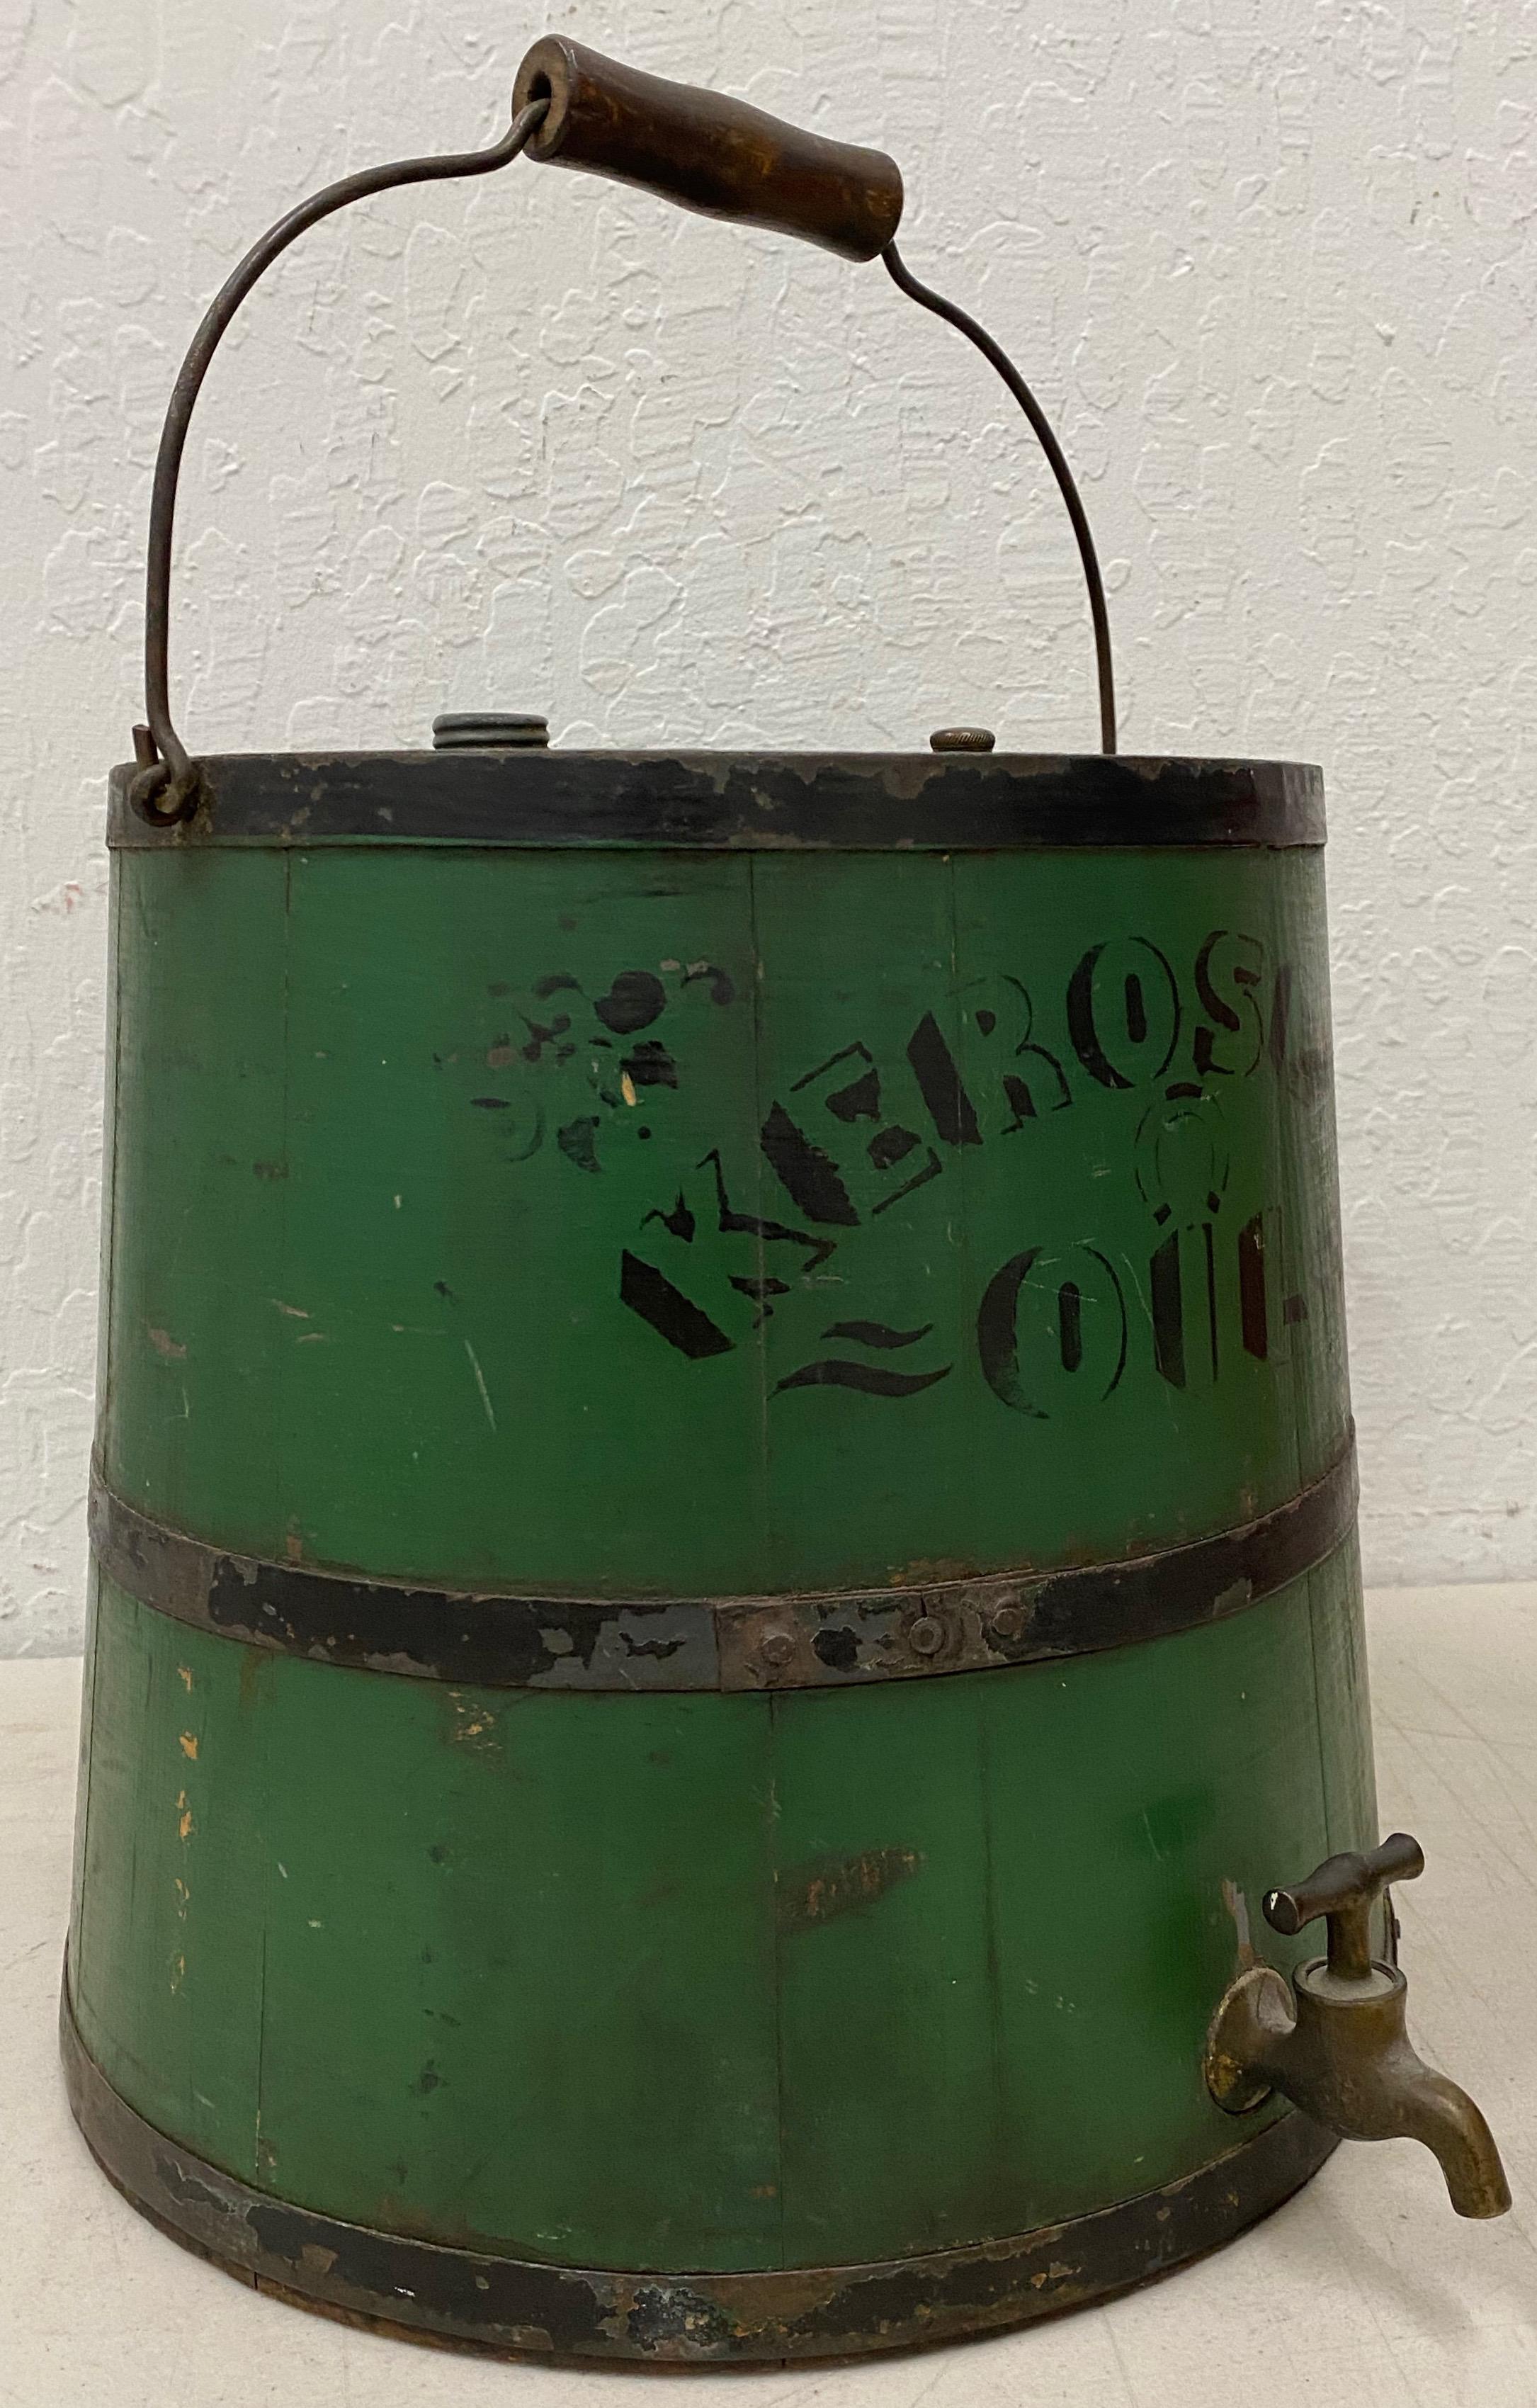 Early 20th century green kerosene can

Fantastic old school wooden and metal strap handmade kerosene oil can.

Though we don't use the cans today, kerosene lamps were in most every household in America in the 19th and early 20th